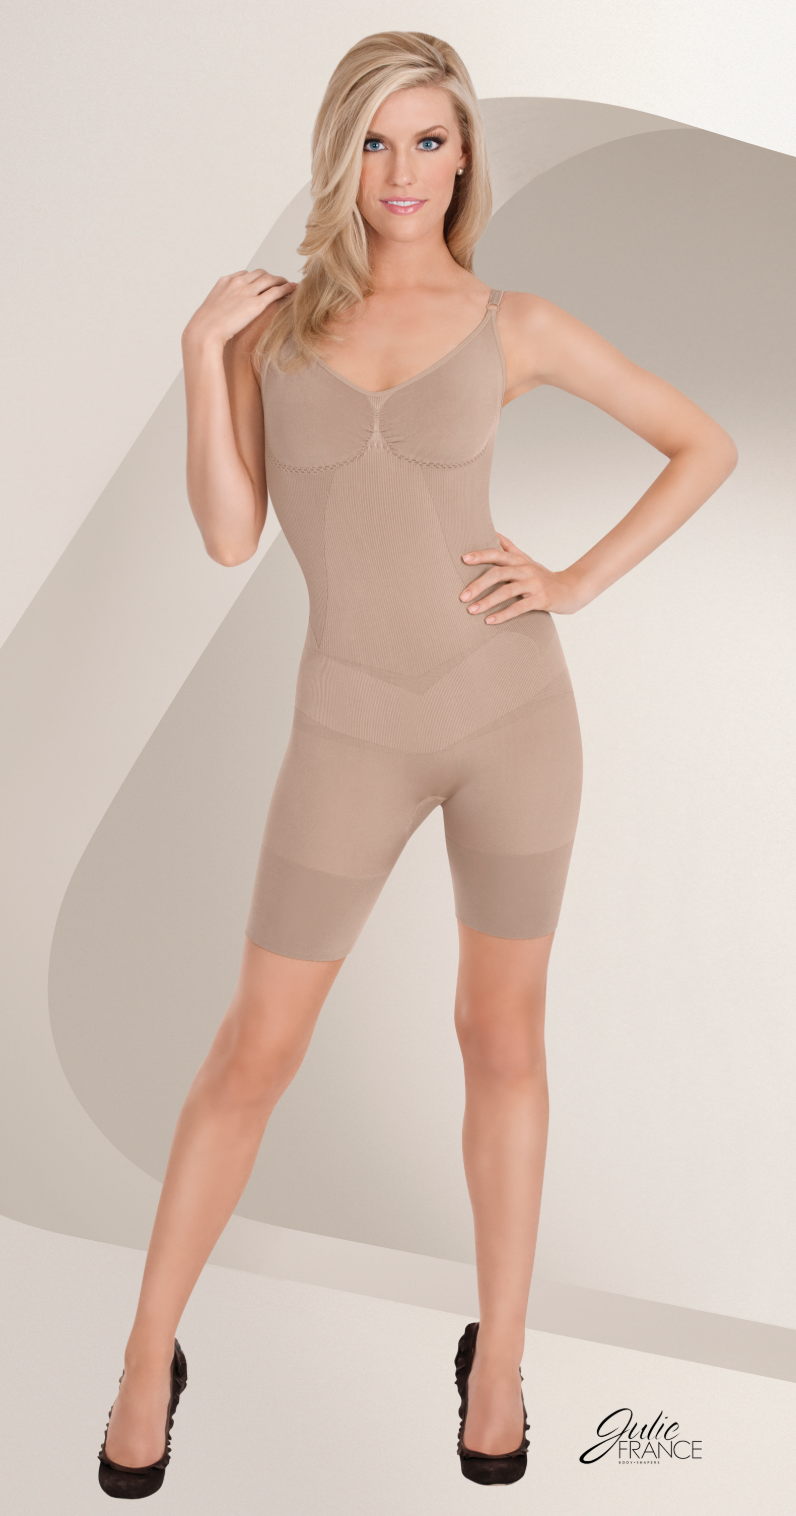 Julie France JF002 Boxer Body Shaper - nude full body shape wear, perfect foundation wear to smooth and lift your silhouette